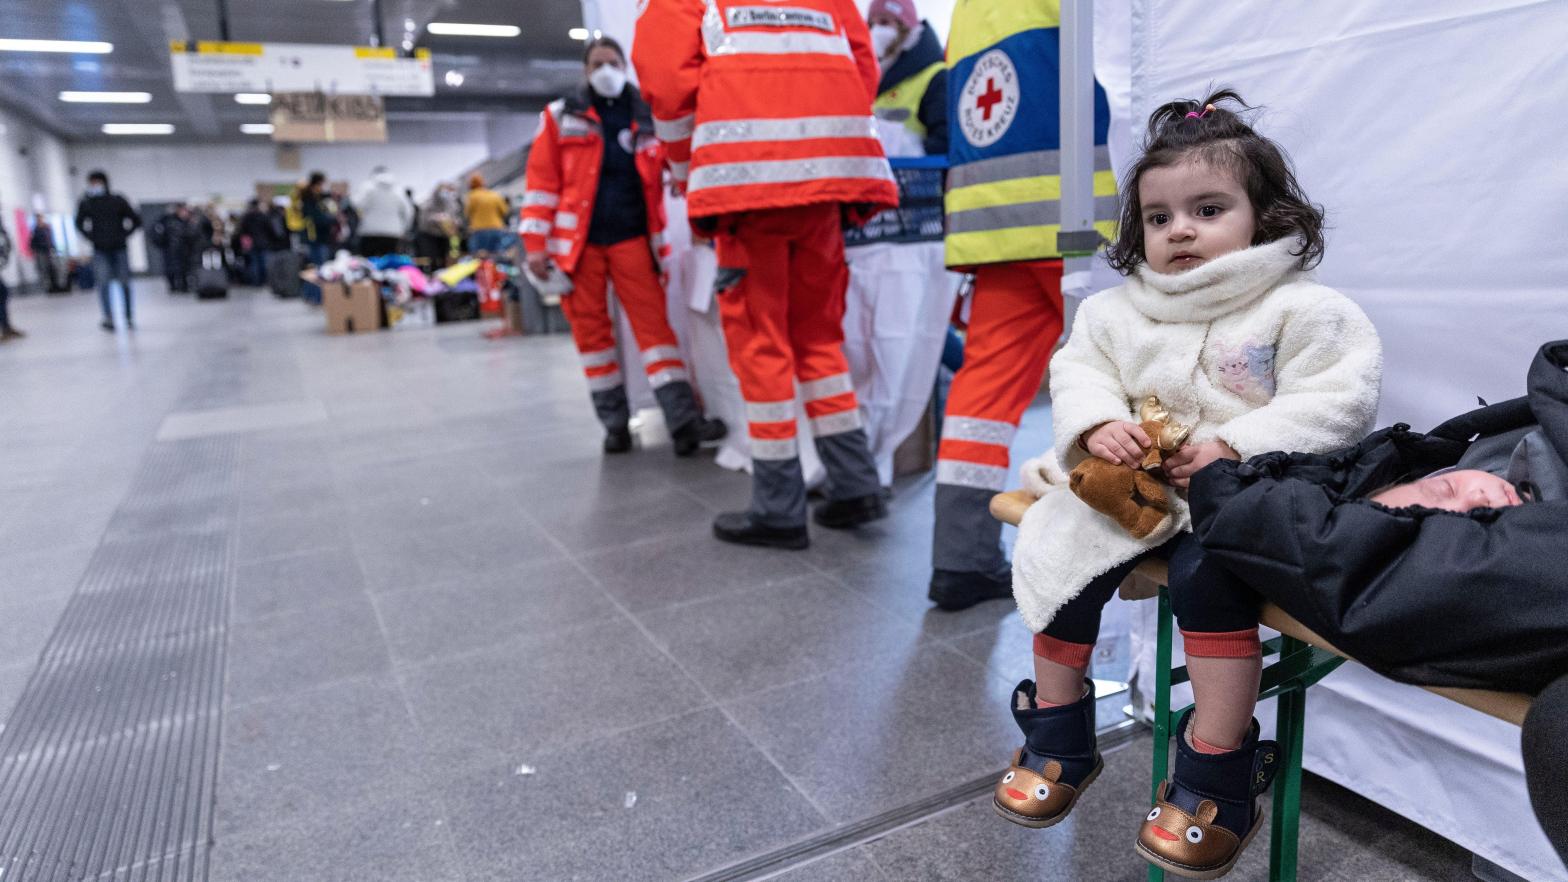 A little girl and a baby wait next to the Red Cross station as people fleeing Ukraine arrive on a train from Poland at Hauptbahnhof railway station on March 4, 2022 in Berlin, Germany.  (Photo: Maja Hitij, Getty Images)